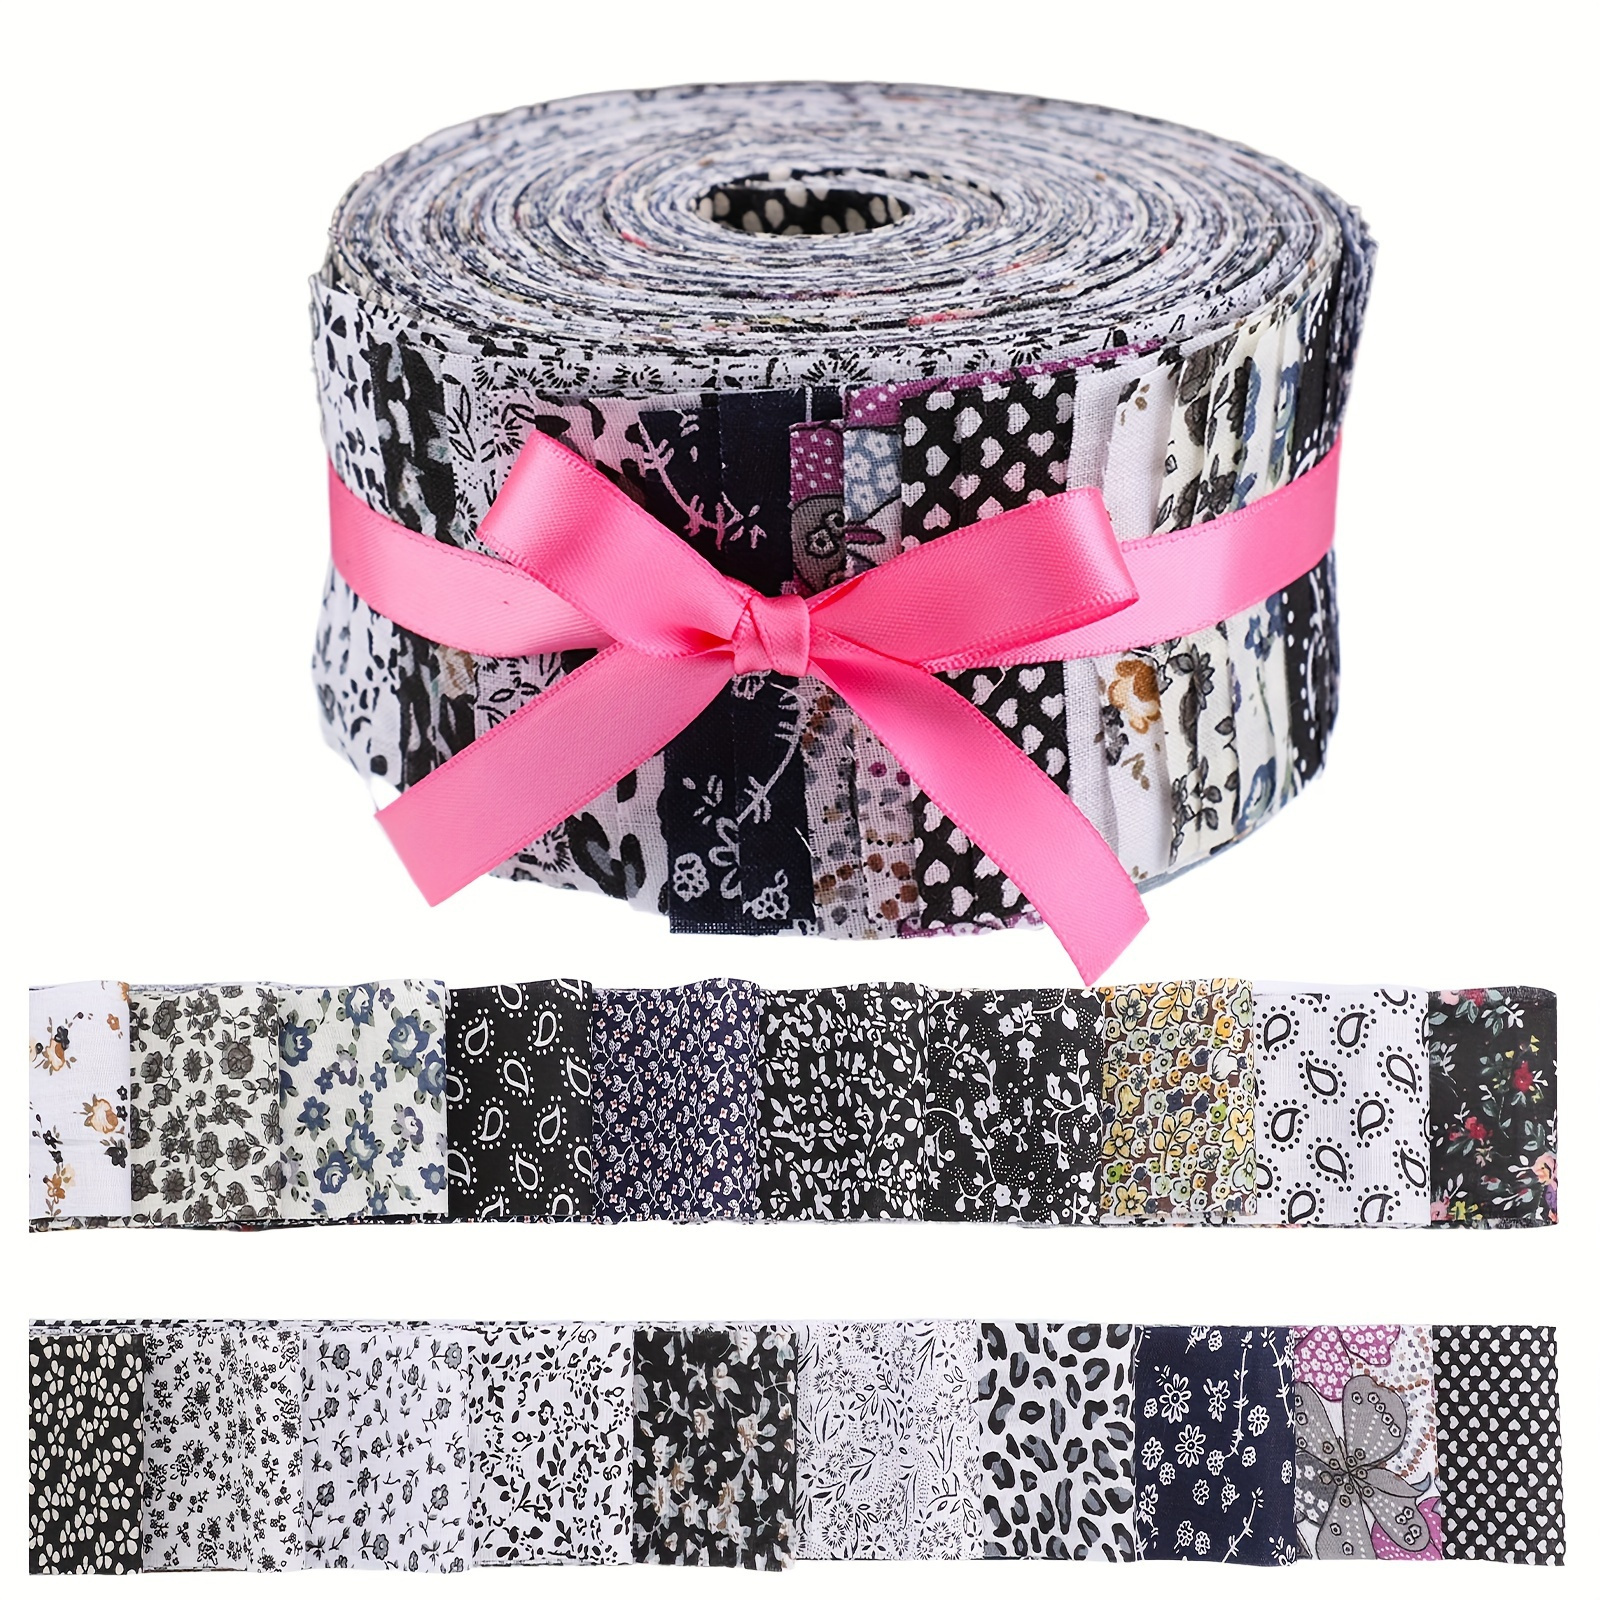 

40pcs 2.55*19.68in/6.5*50cm Floral Cotton Patchwork Rolls Cotton Quilting Fabric Rolled Cotton Quilting Strips, Precut Patchwork Rolls For Craft Sewing Diy Crafts